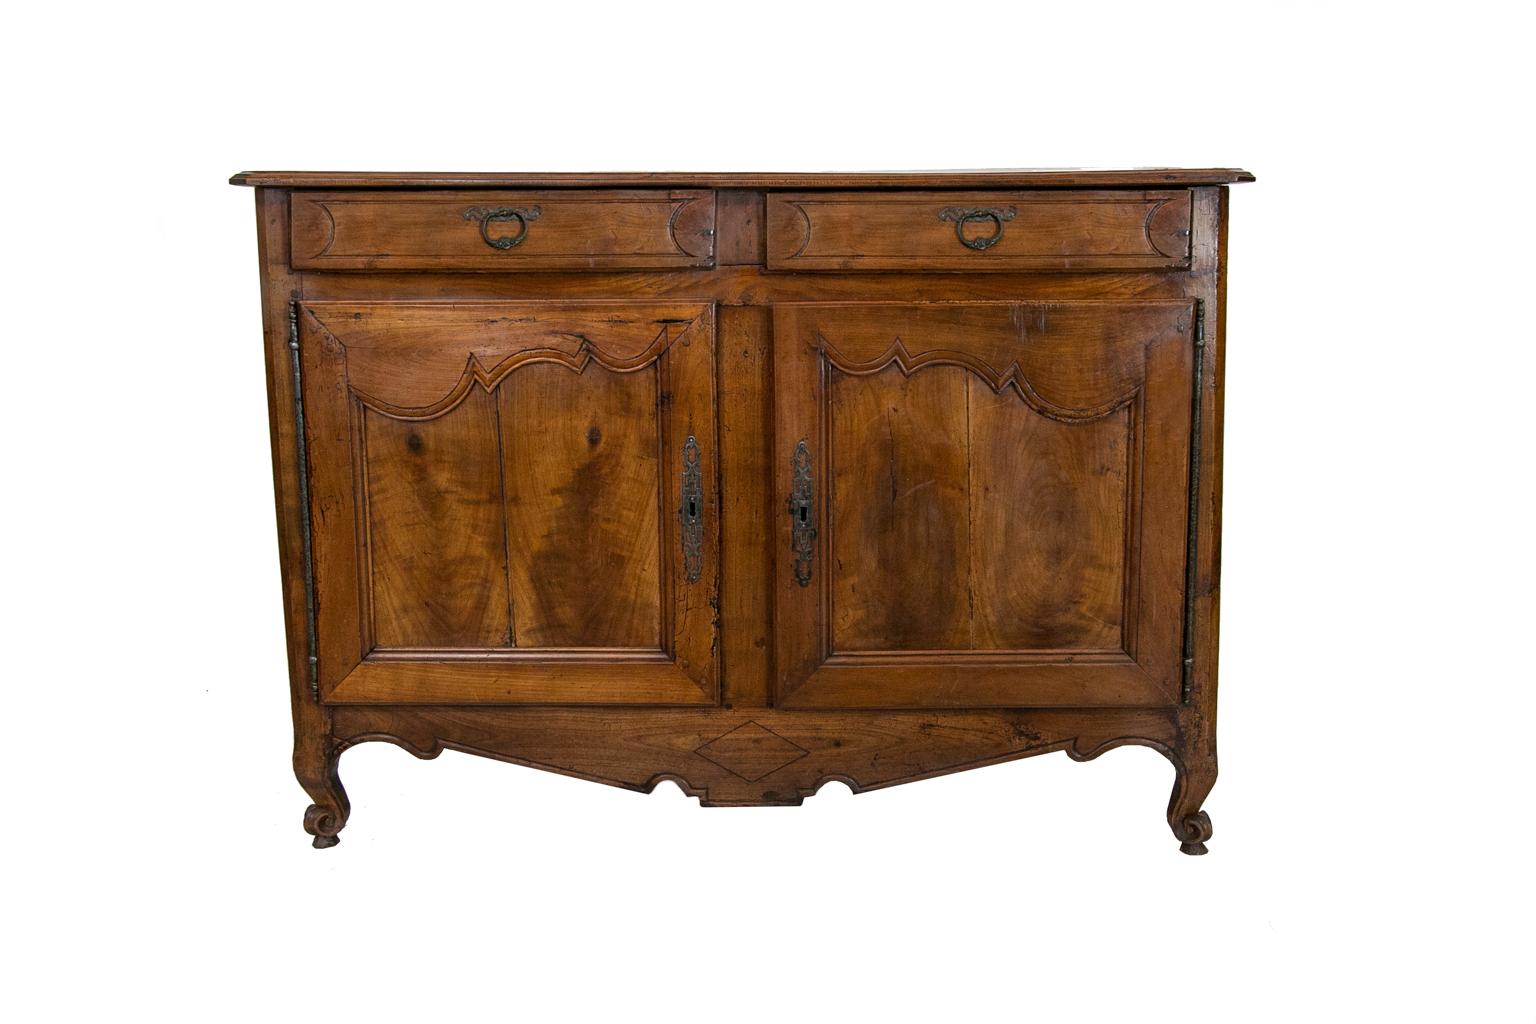 This French cherry buffet has carved incised lines in the drawer fronts. The doors have recessed panels framed with carved molding. The edges of the doors have carved chamfers. There is double peg construction throughout. The top left drawer has its